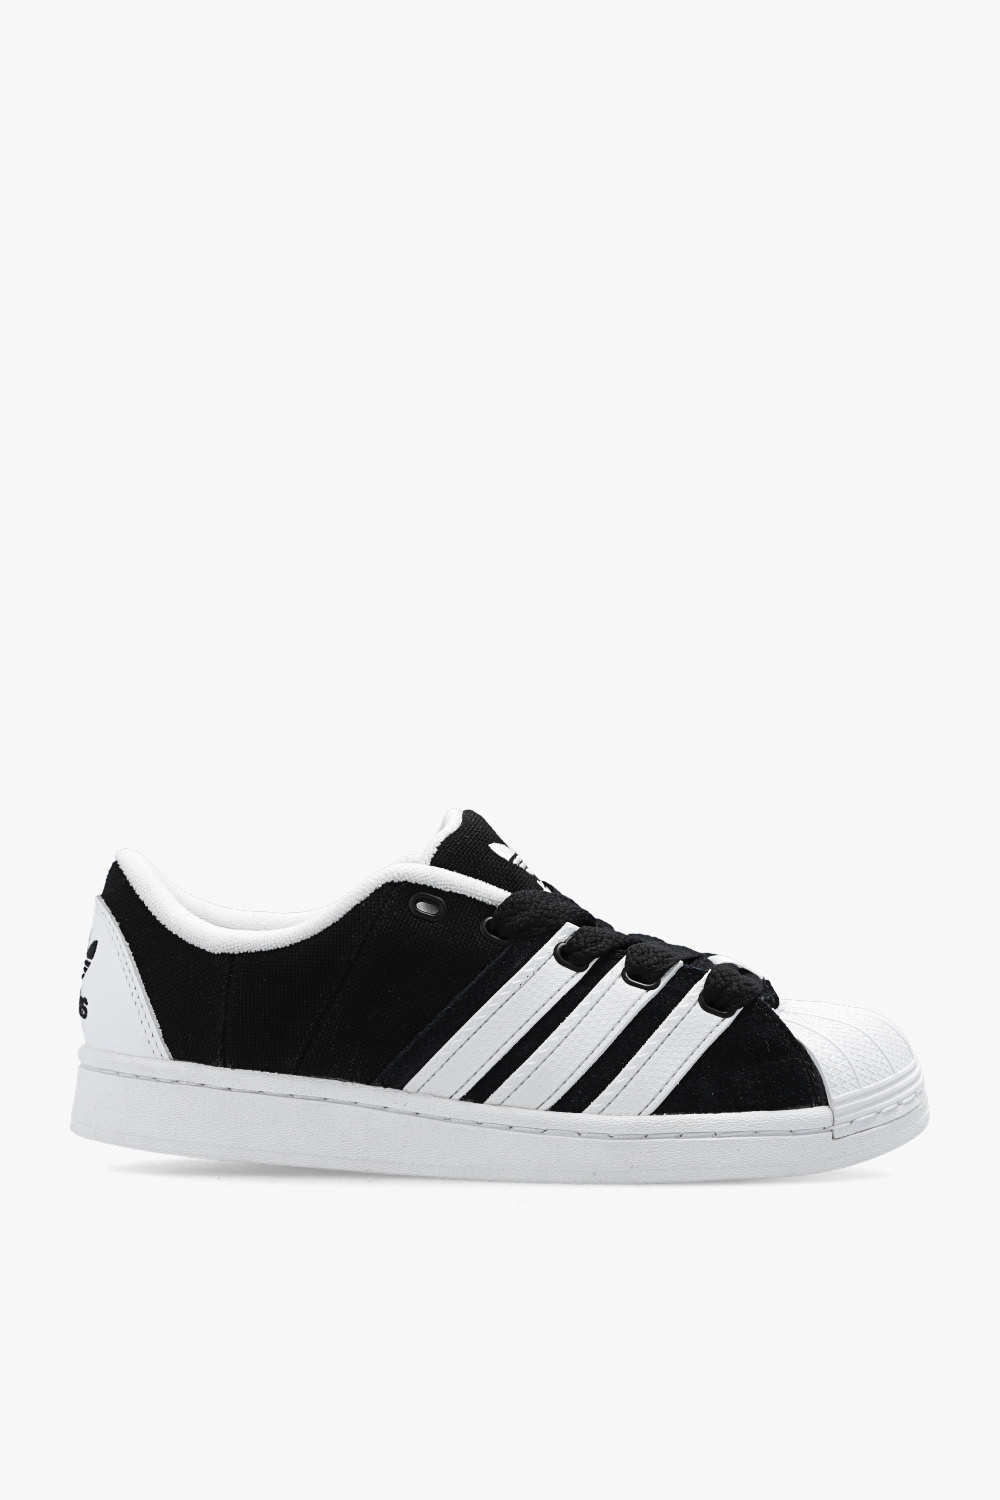 ADIDAS Originals \'SUPERSTAR SUPERMODIFIED\' sneakers ideas adults StclaircomoShops Shoes adidas Men\'s | poster | girls for info | dress